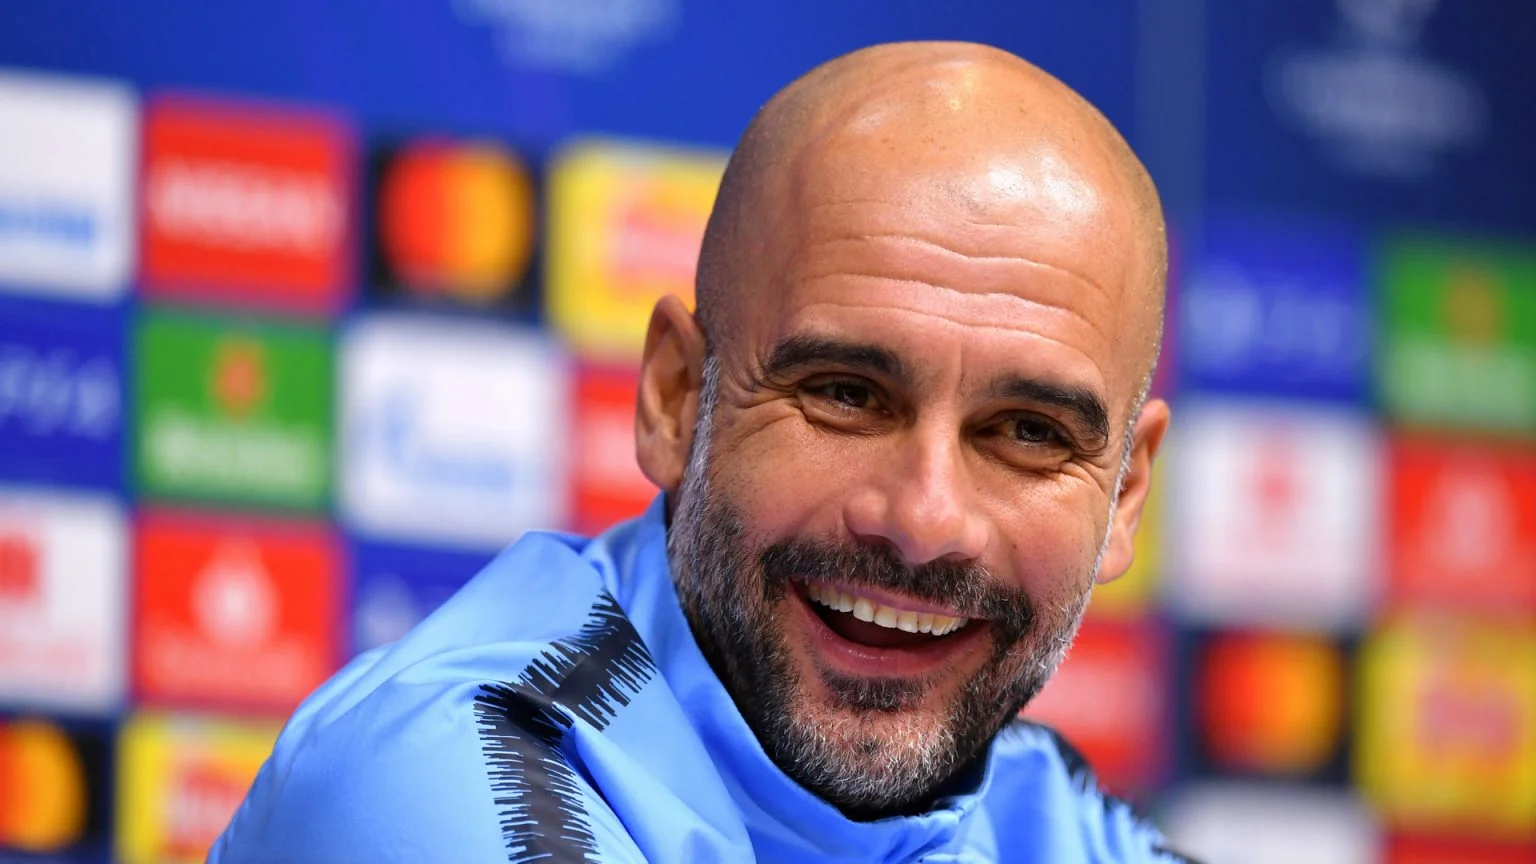 UCL: Guardiola’s daughter reveals ‘the greatest’ manager